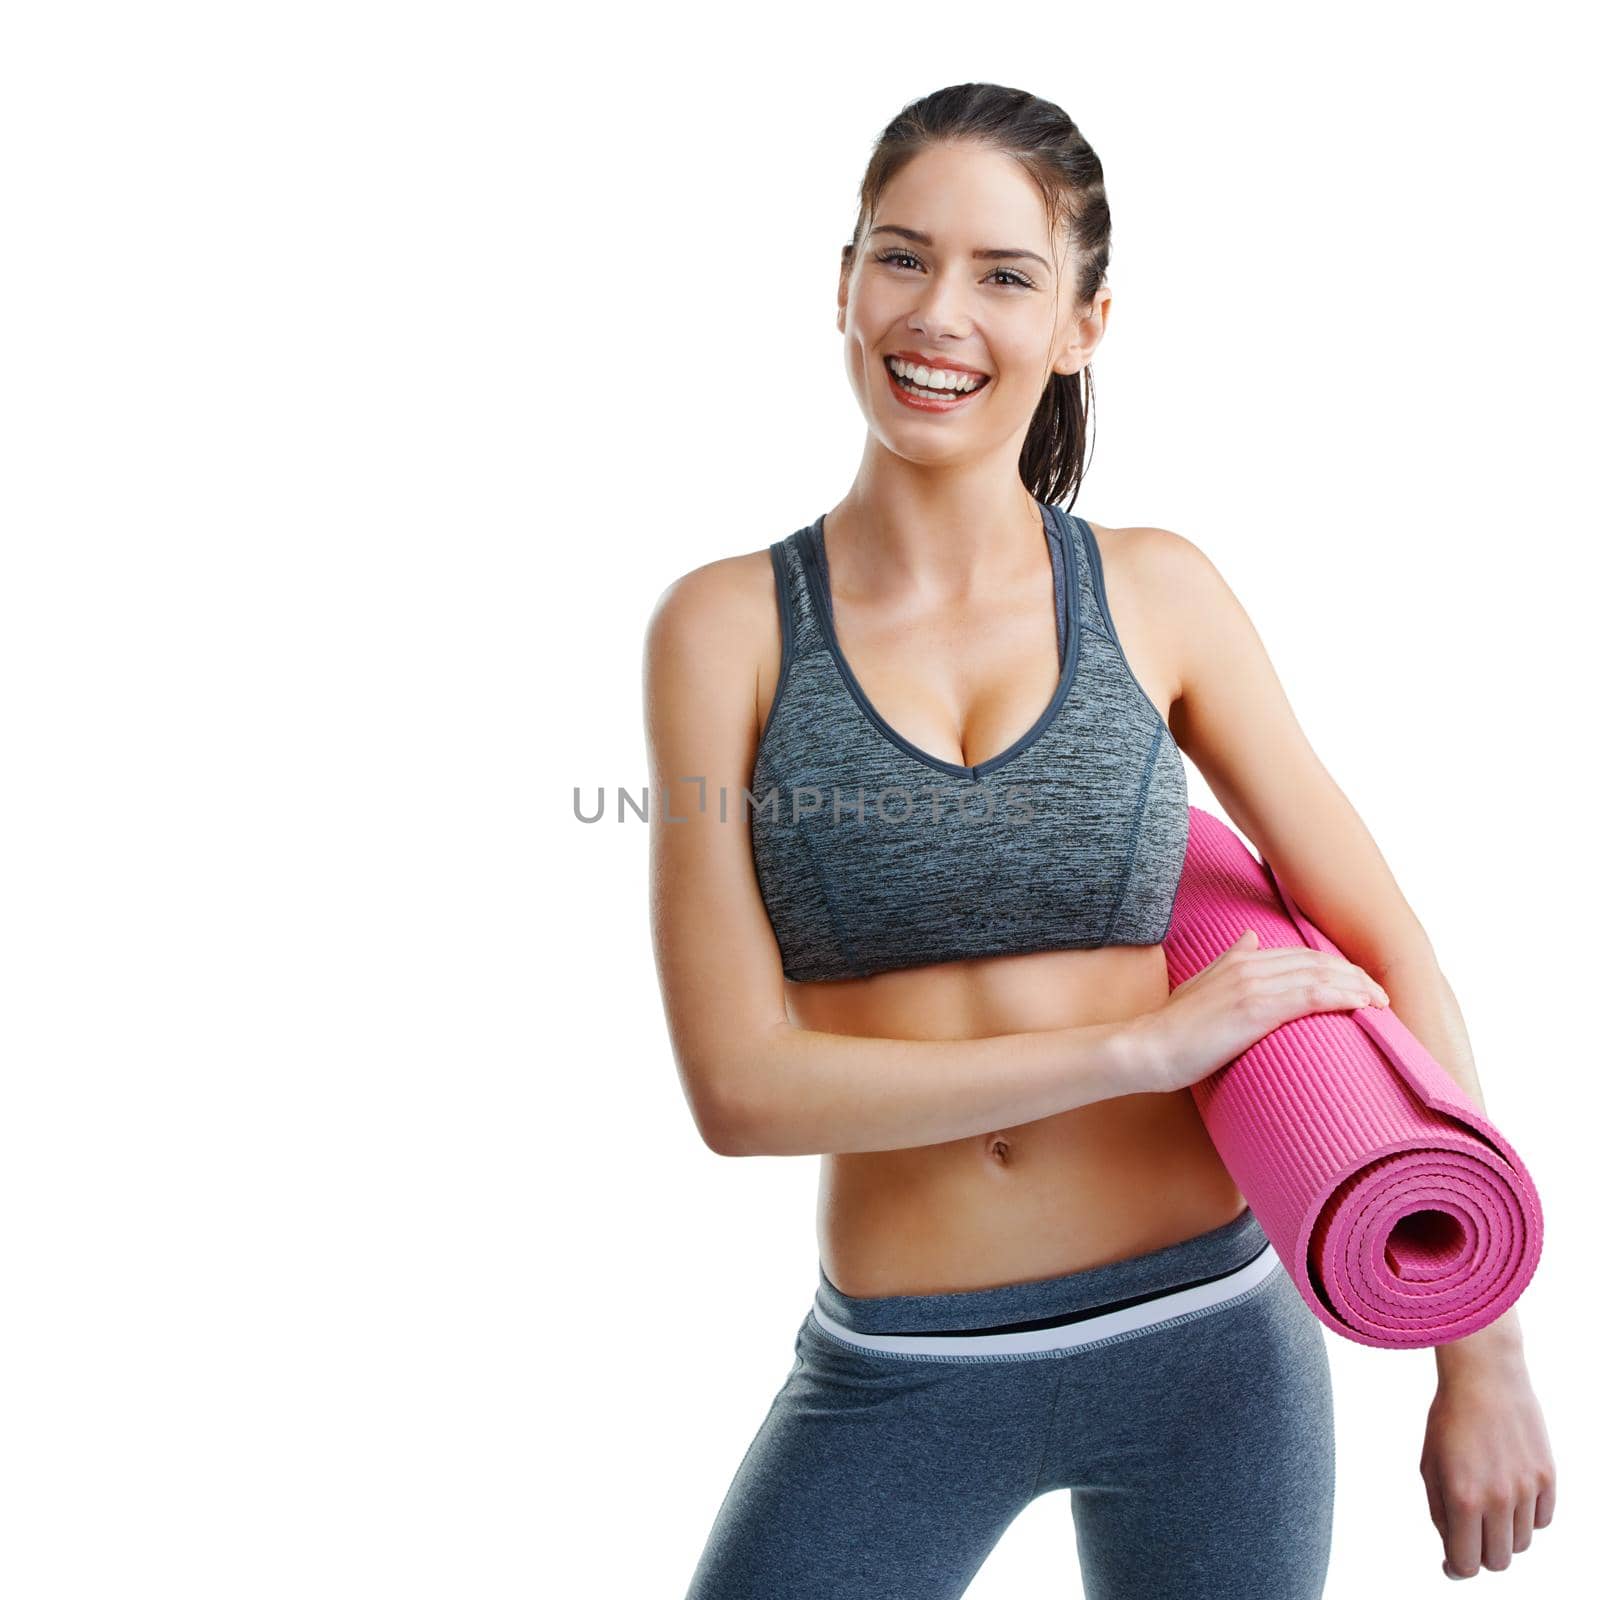 Studio shot of a fit young woman holding an exercise mat isolated on white.